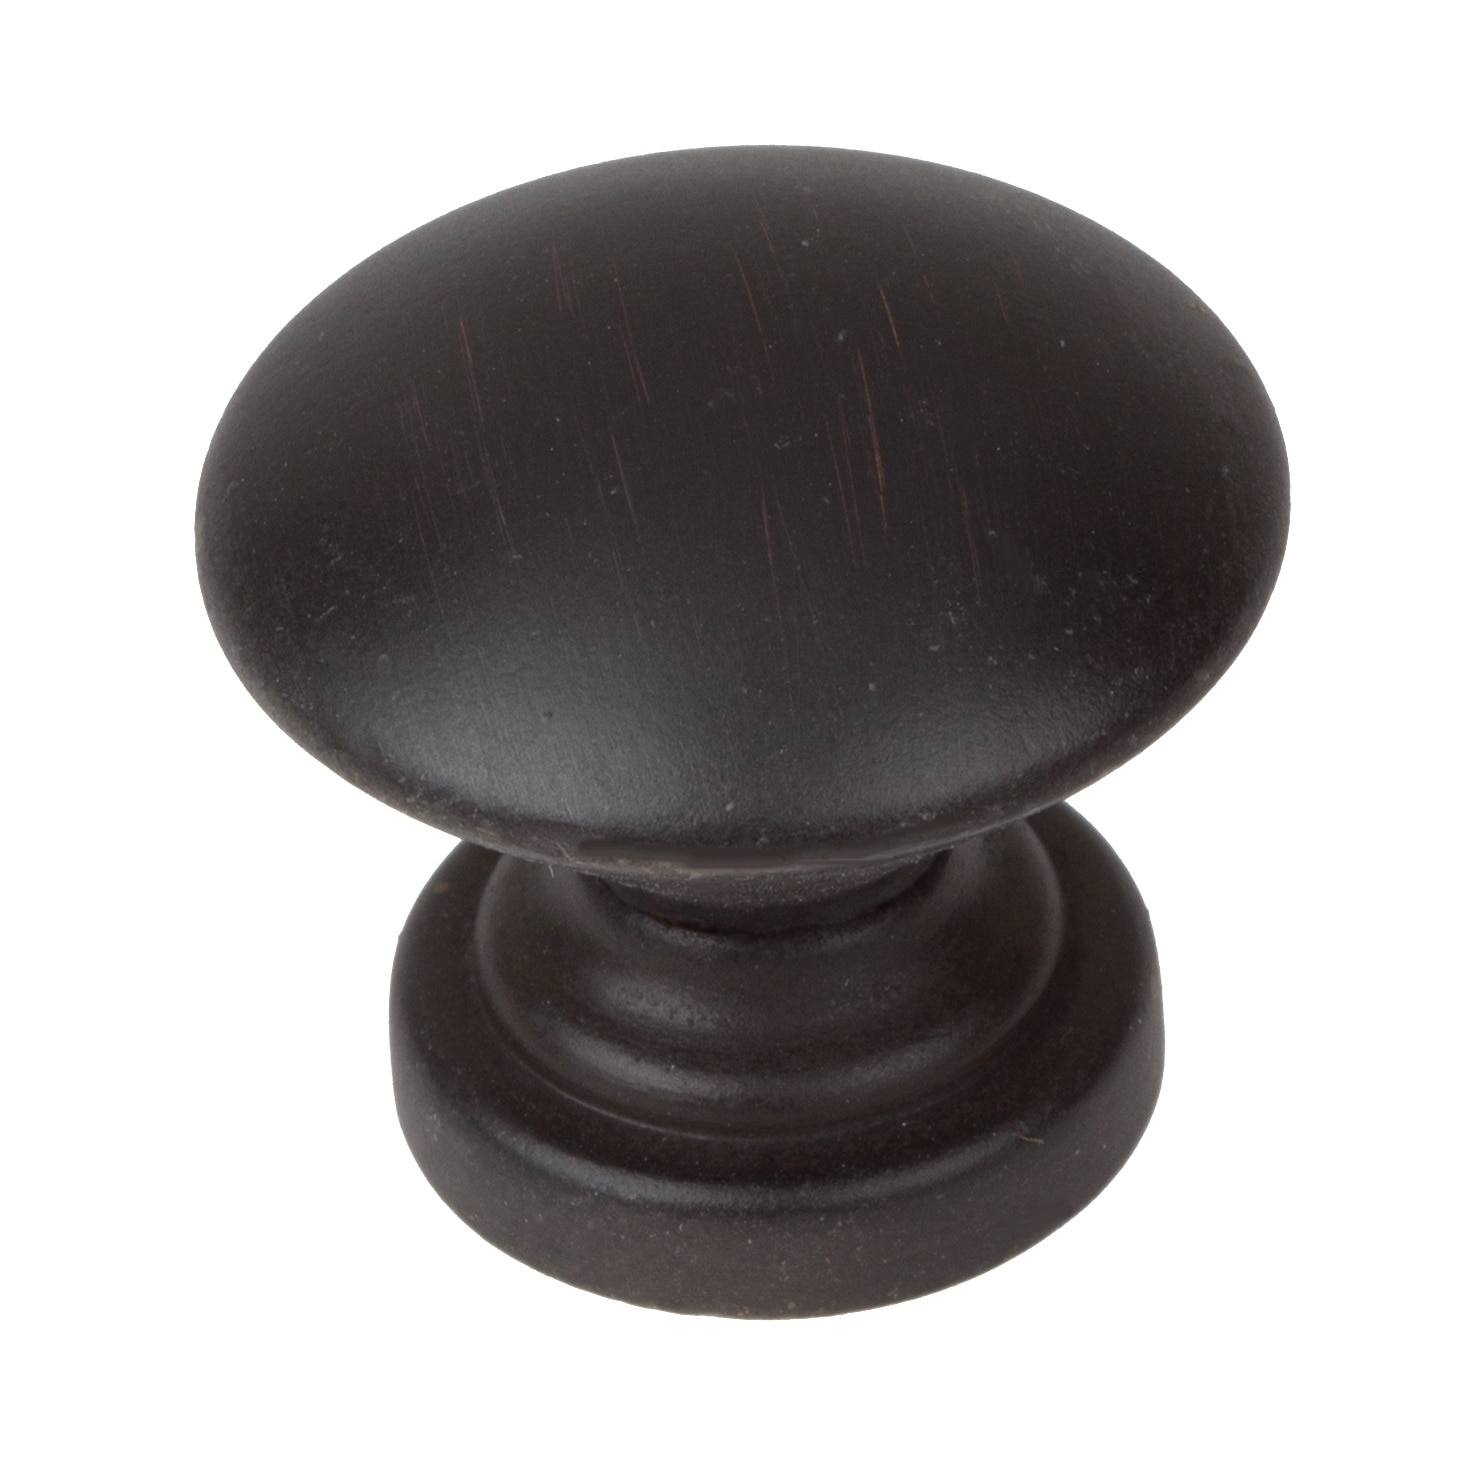 GlideRite 1 in. Classic Round Convex Cabinet Hardware Knobs, Oil Rubbed Bronze, Pack of 25 - image 2 of 5